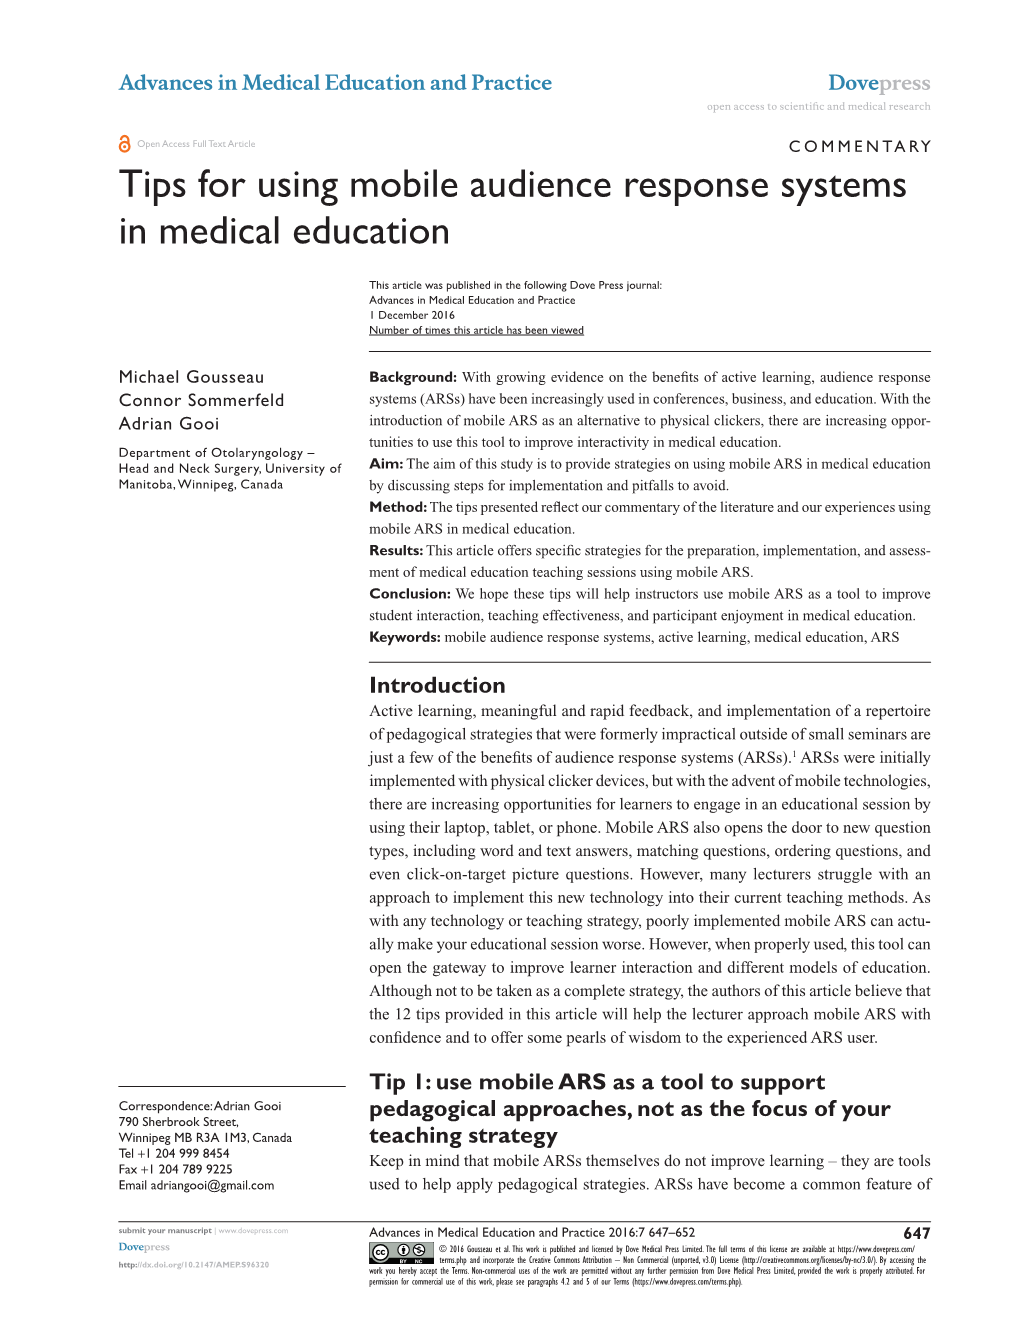 Tips for Using Mobile Audience Response Systems in Medical Education